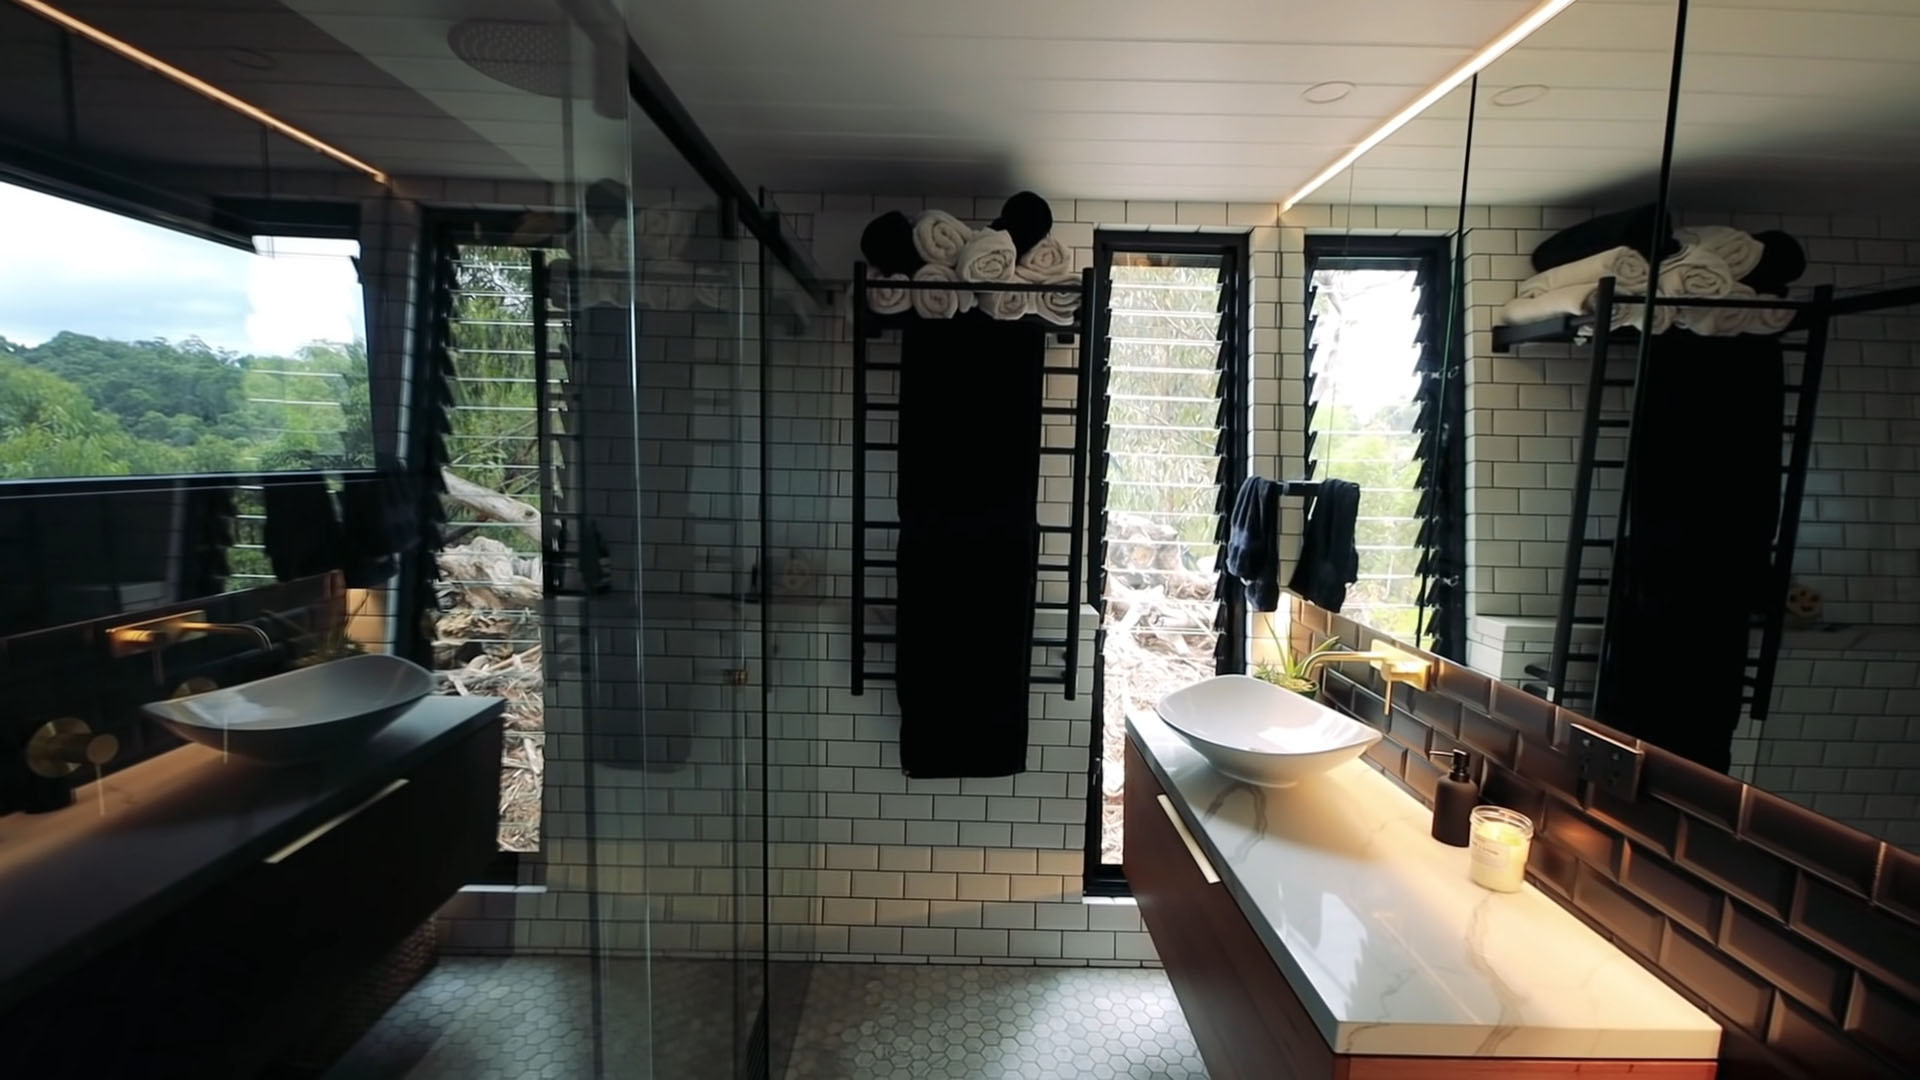 Believe it or not this beautiful luxury bathroom featuring a double shower with glass doors, toilet, vanity with bowl sink and storage is found in a Tiny House.